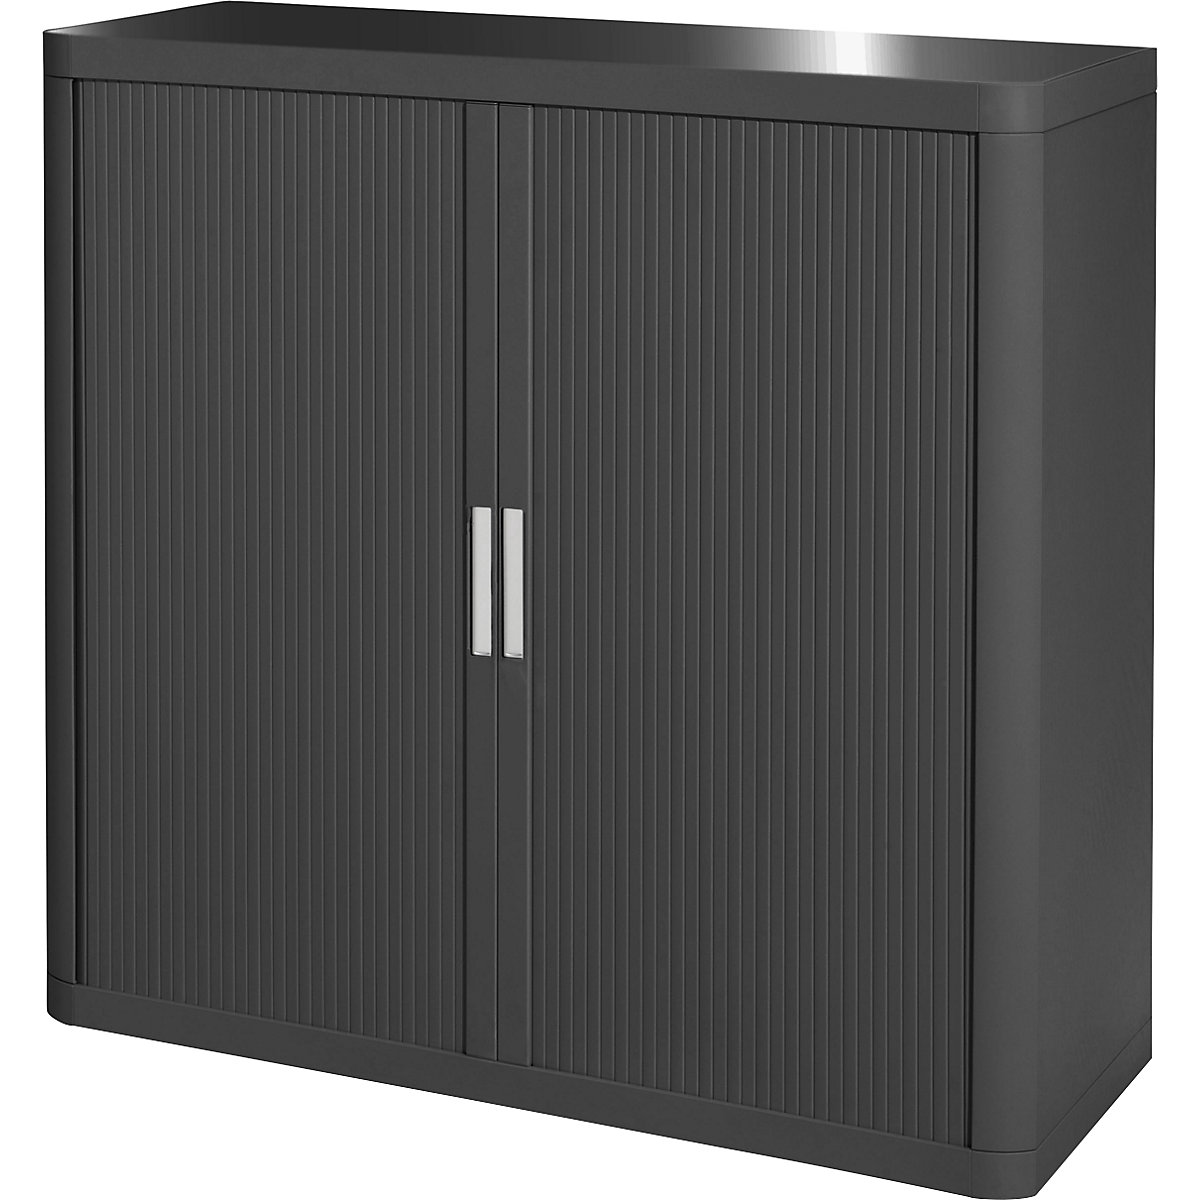 easyOffice® roller shutter cupboard – Paperflow, 2 shelves, height 1040 mm, charcoal / charcoal-15